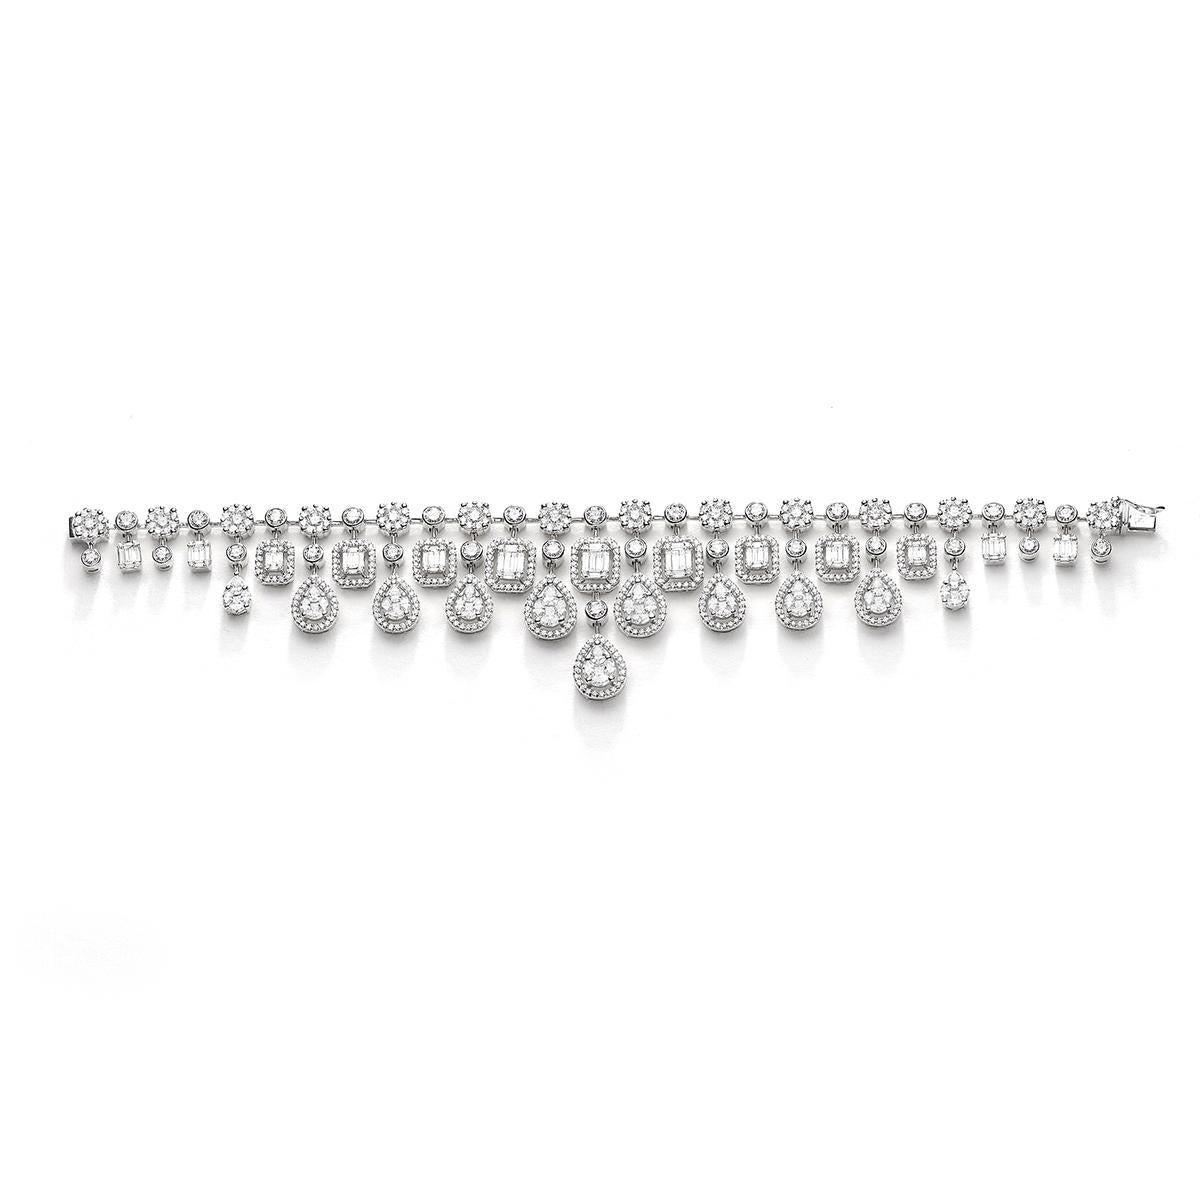 Bracelet in 18kt white gold set with 131 pear-shaped, baguette, princess marquise cut diamonds 3.98 cts and 606 diamonds 7.91 cts